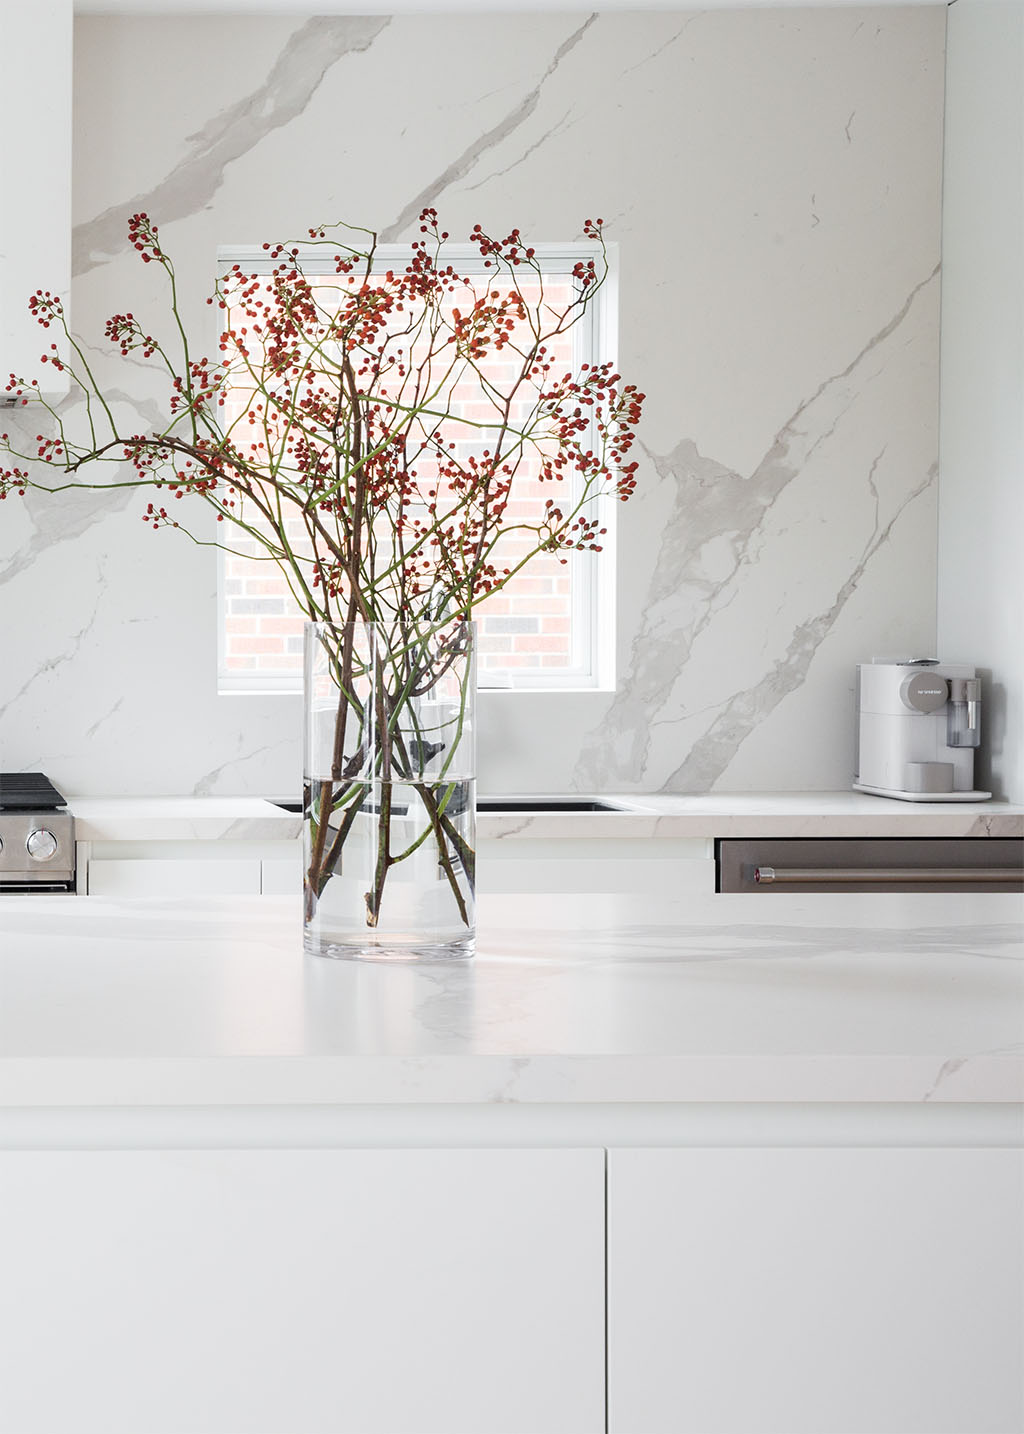 White kitchen countertop with glass vase filled with flowers